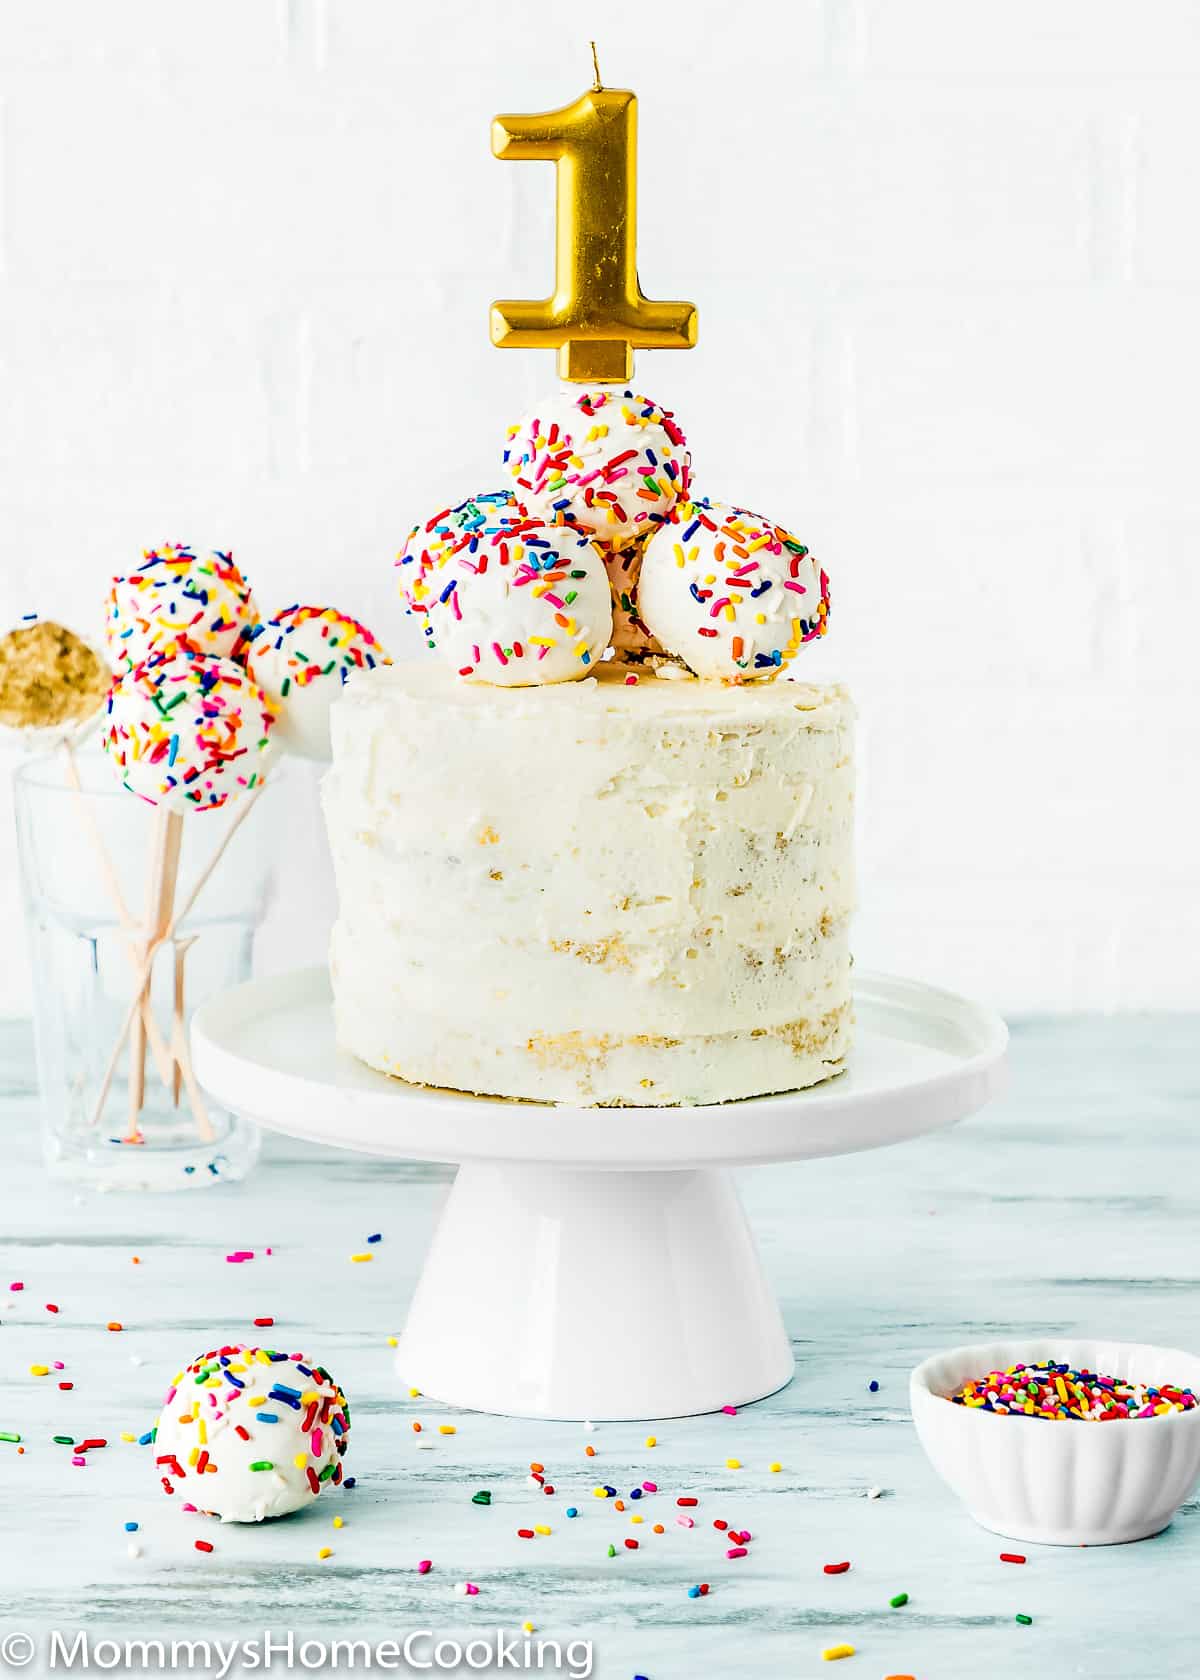 egg-free refined sugar-free smash cake with cake pops on top and a candle